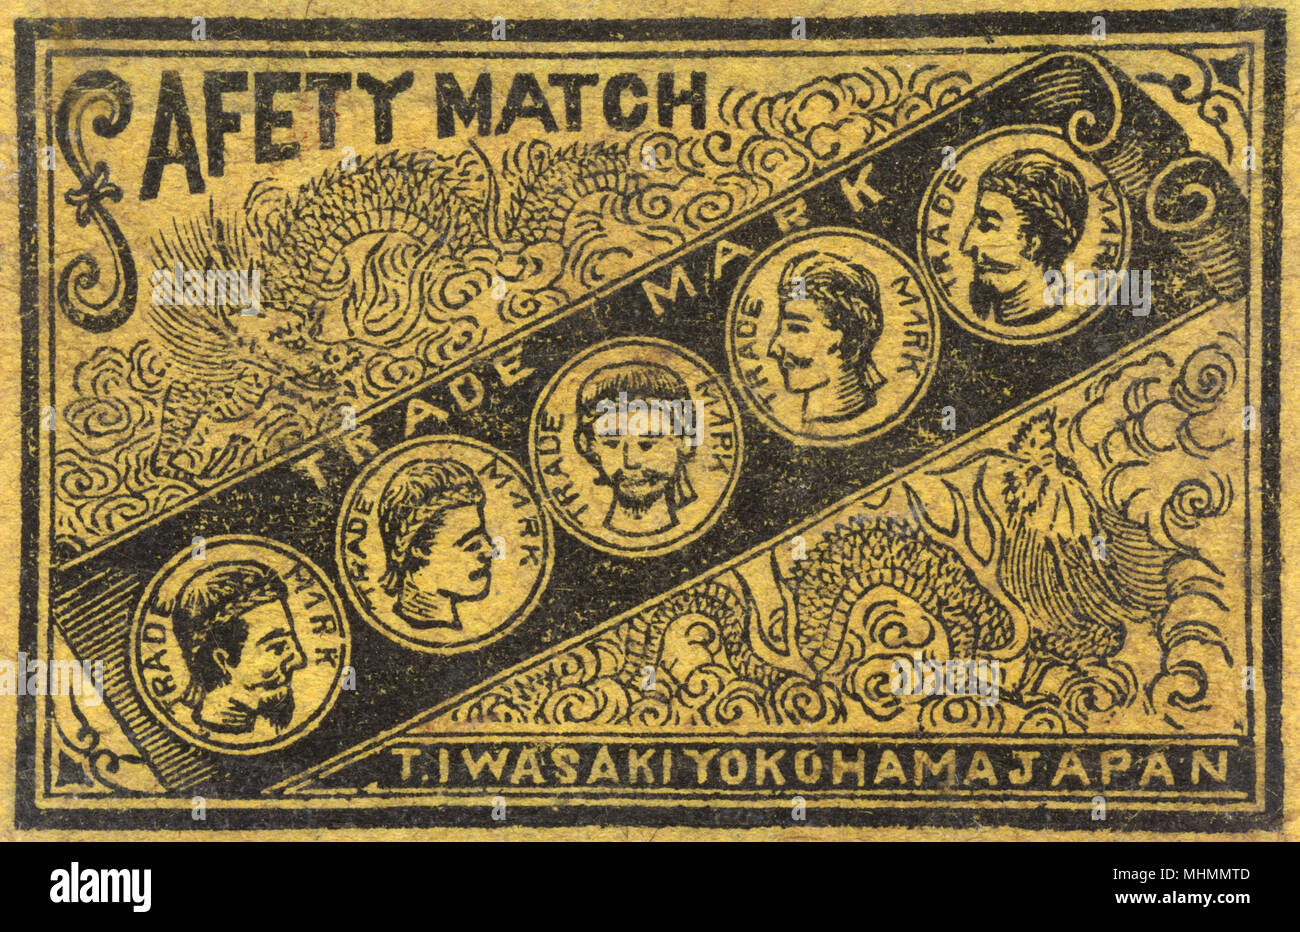 Old Japanese Matchbox label with Dragons and men's heads Stock Photo